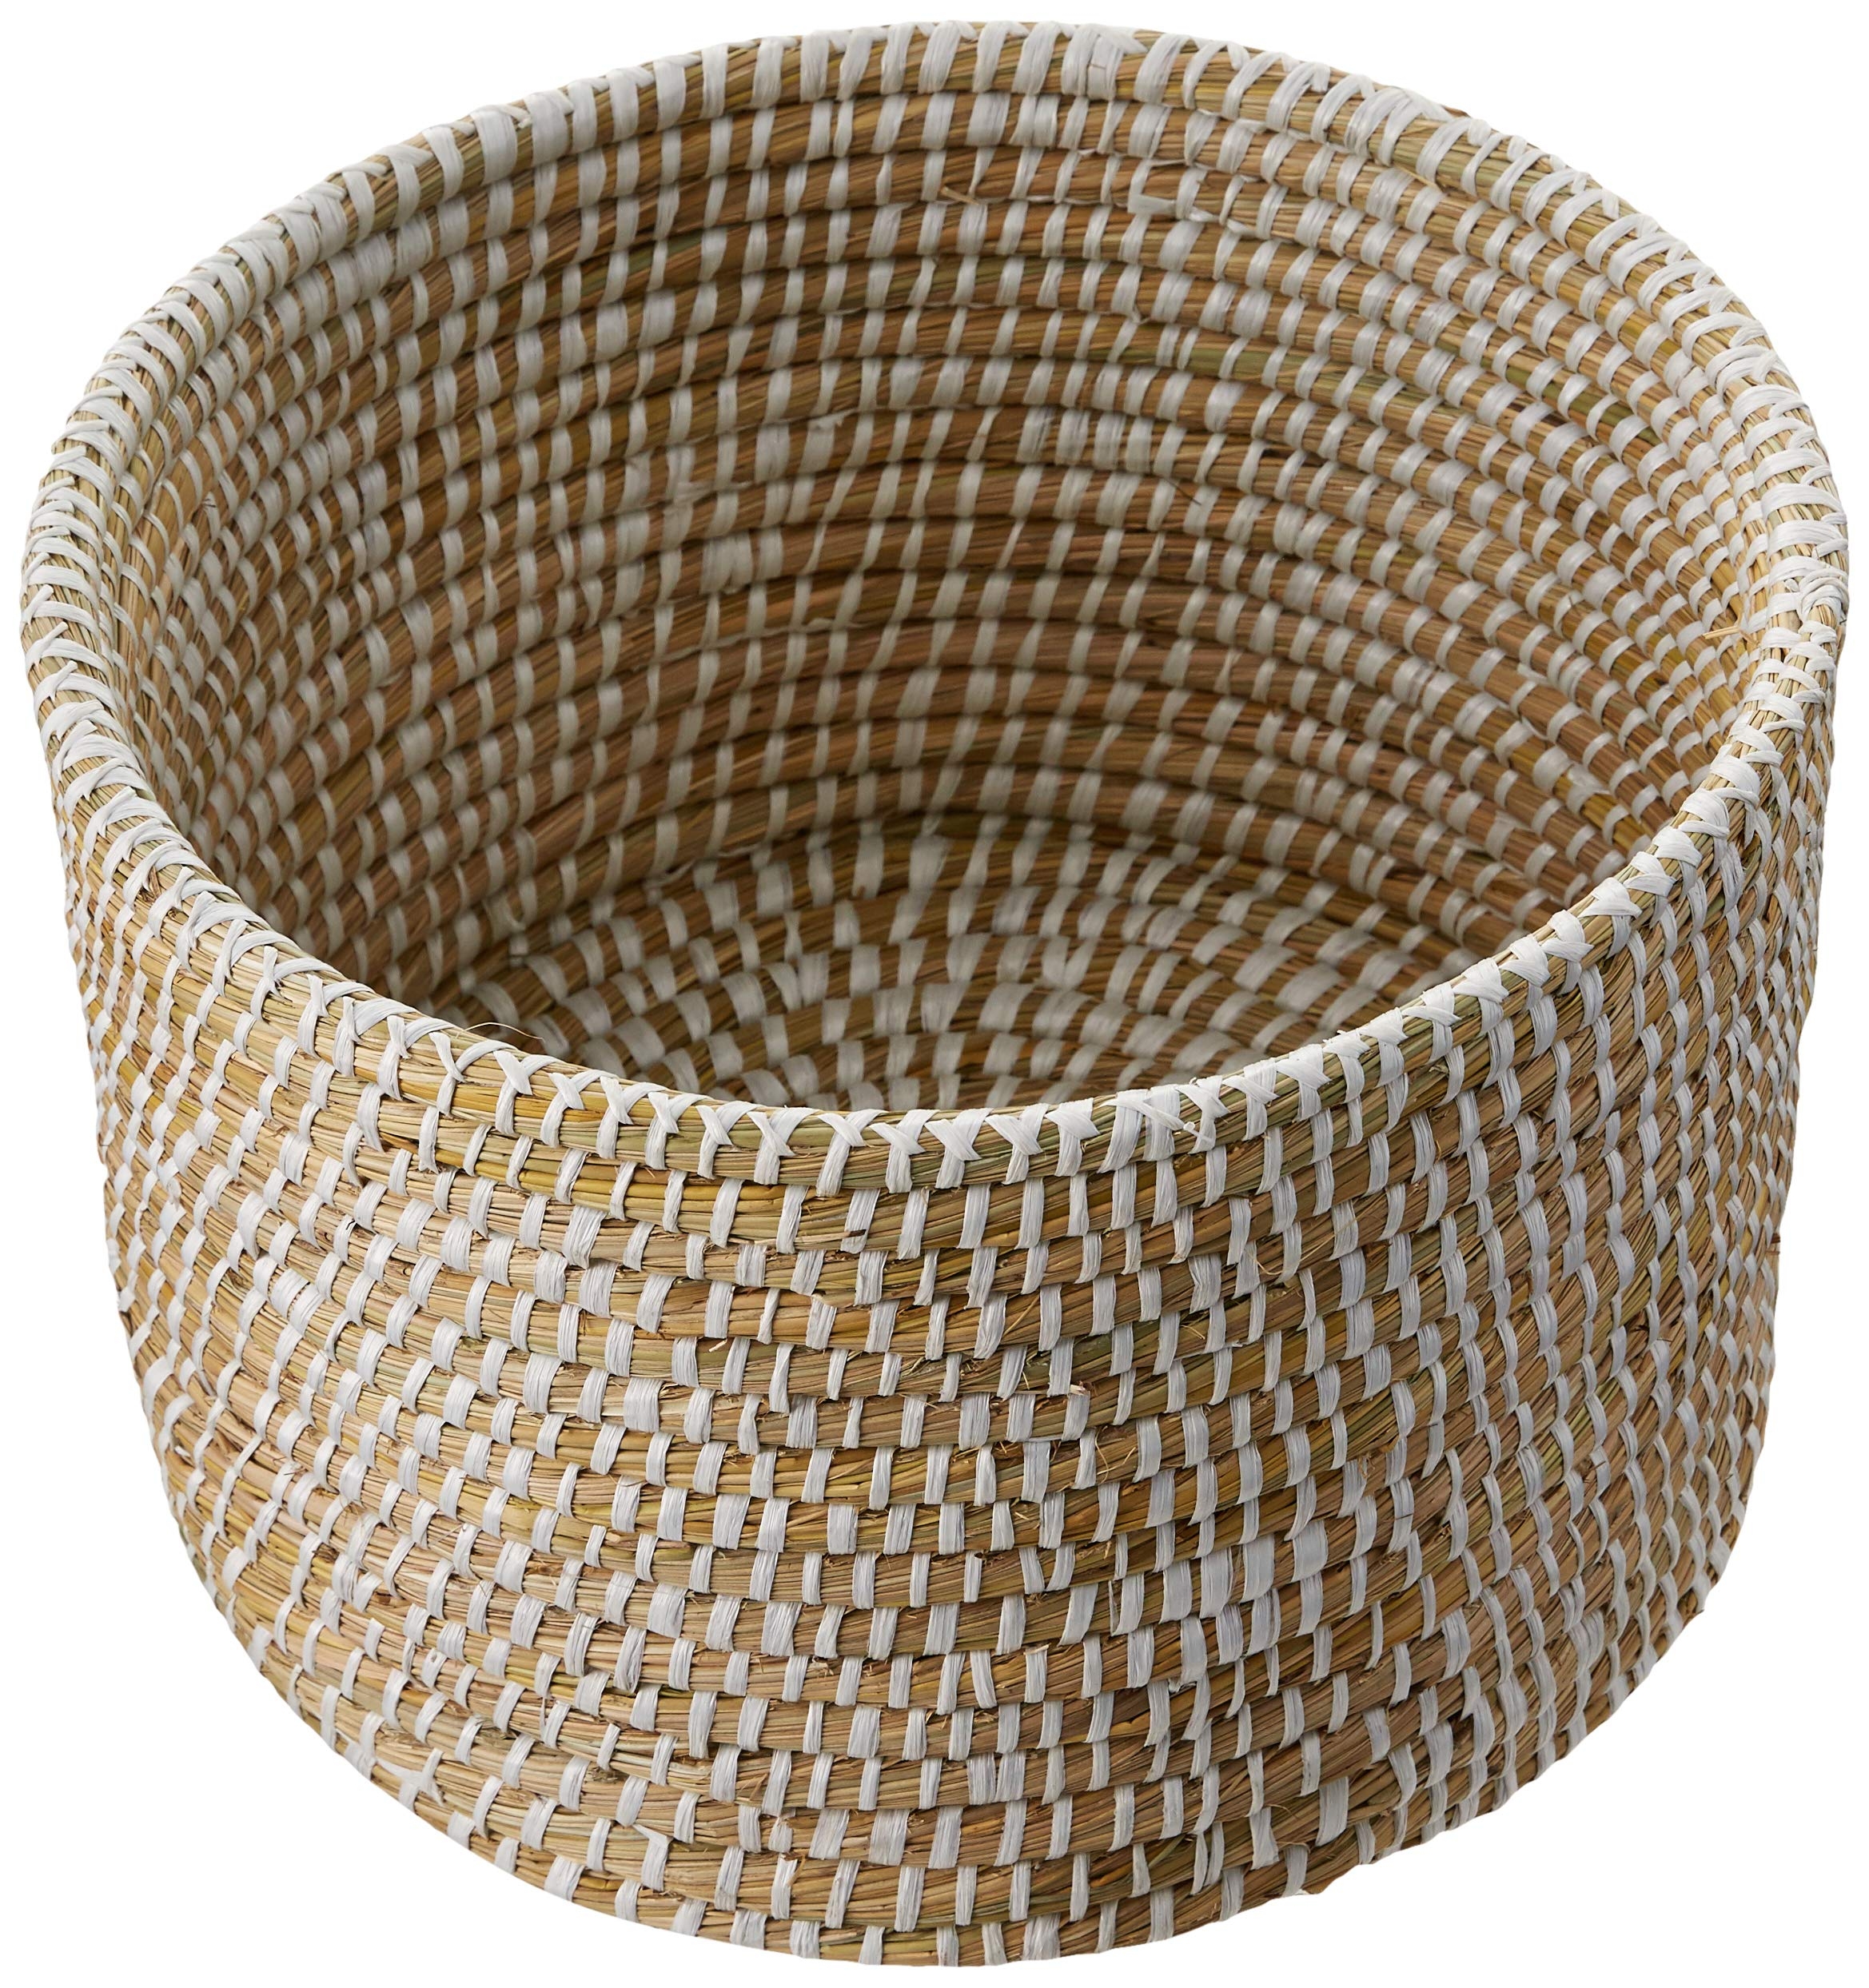 Whitewashed Woven Seagrass Baskets with Lids (Set of 3 Sizes) - Image 1